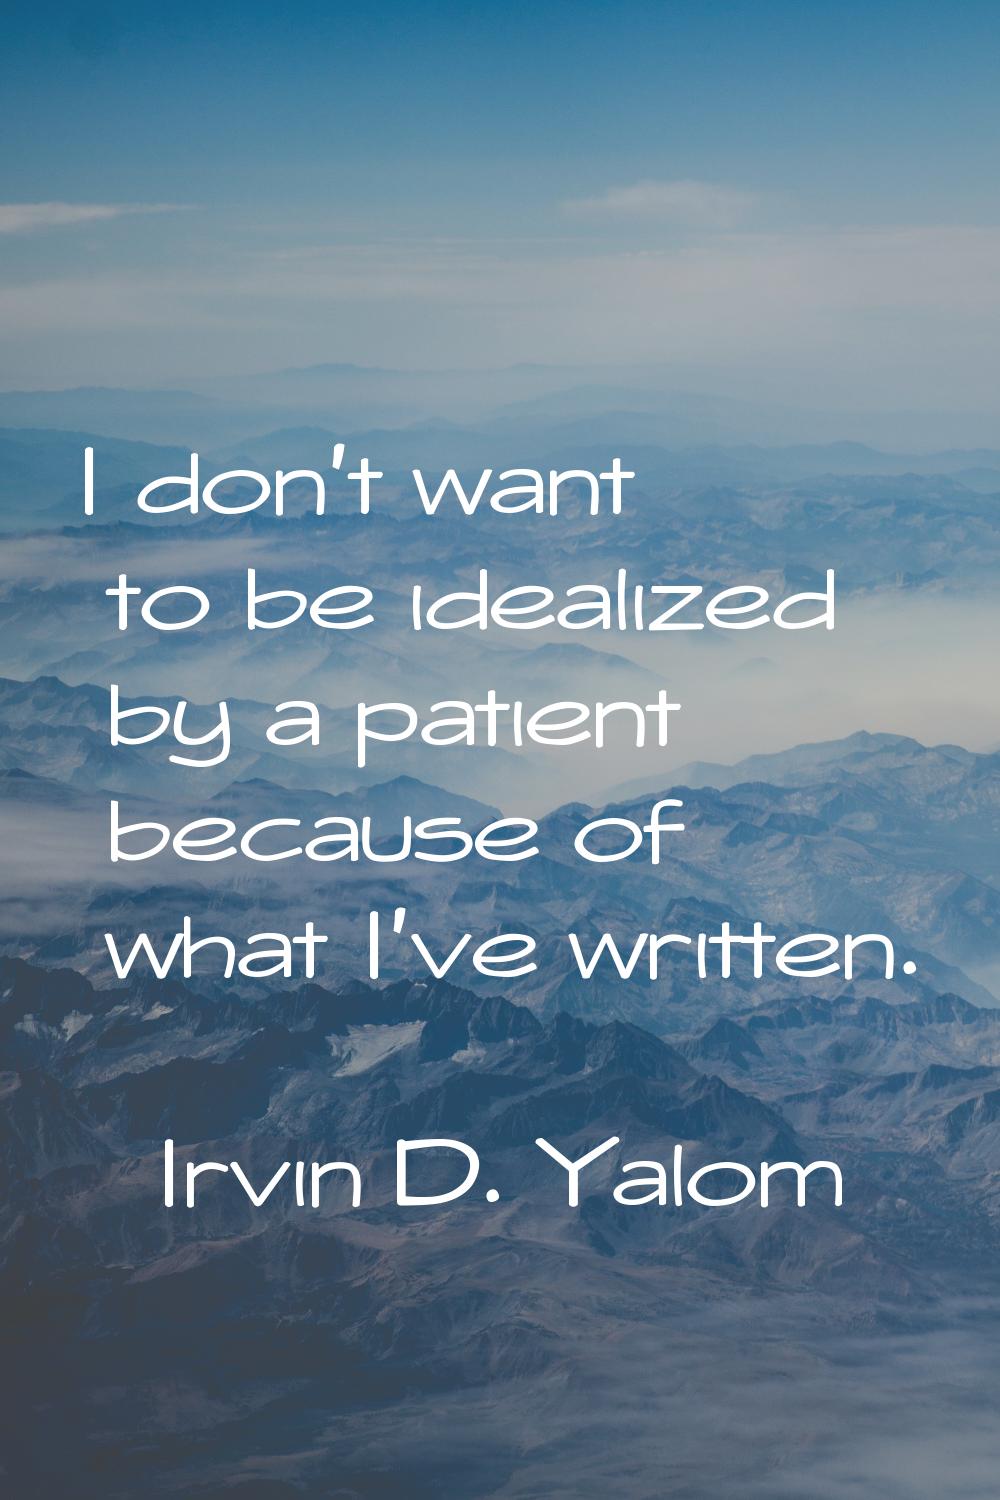 I don't want to be idealized by a patient because of what I've written.